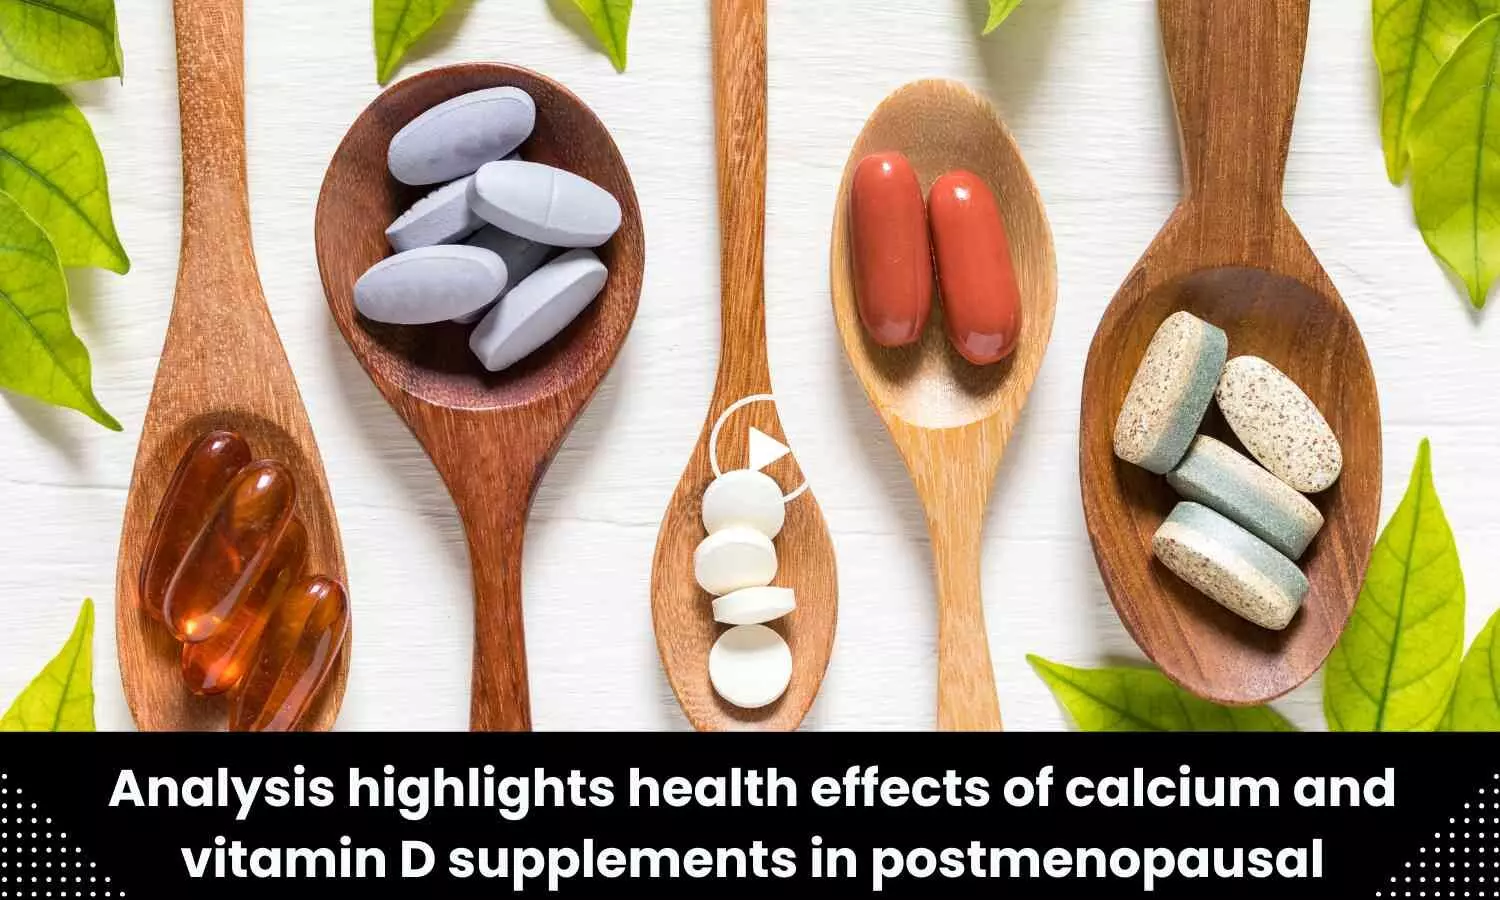 Analysis highlights health effects of calcium and vitamin D supplements in postmenopausal women